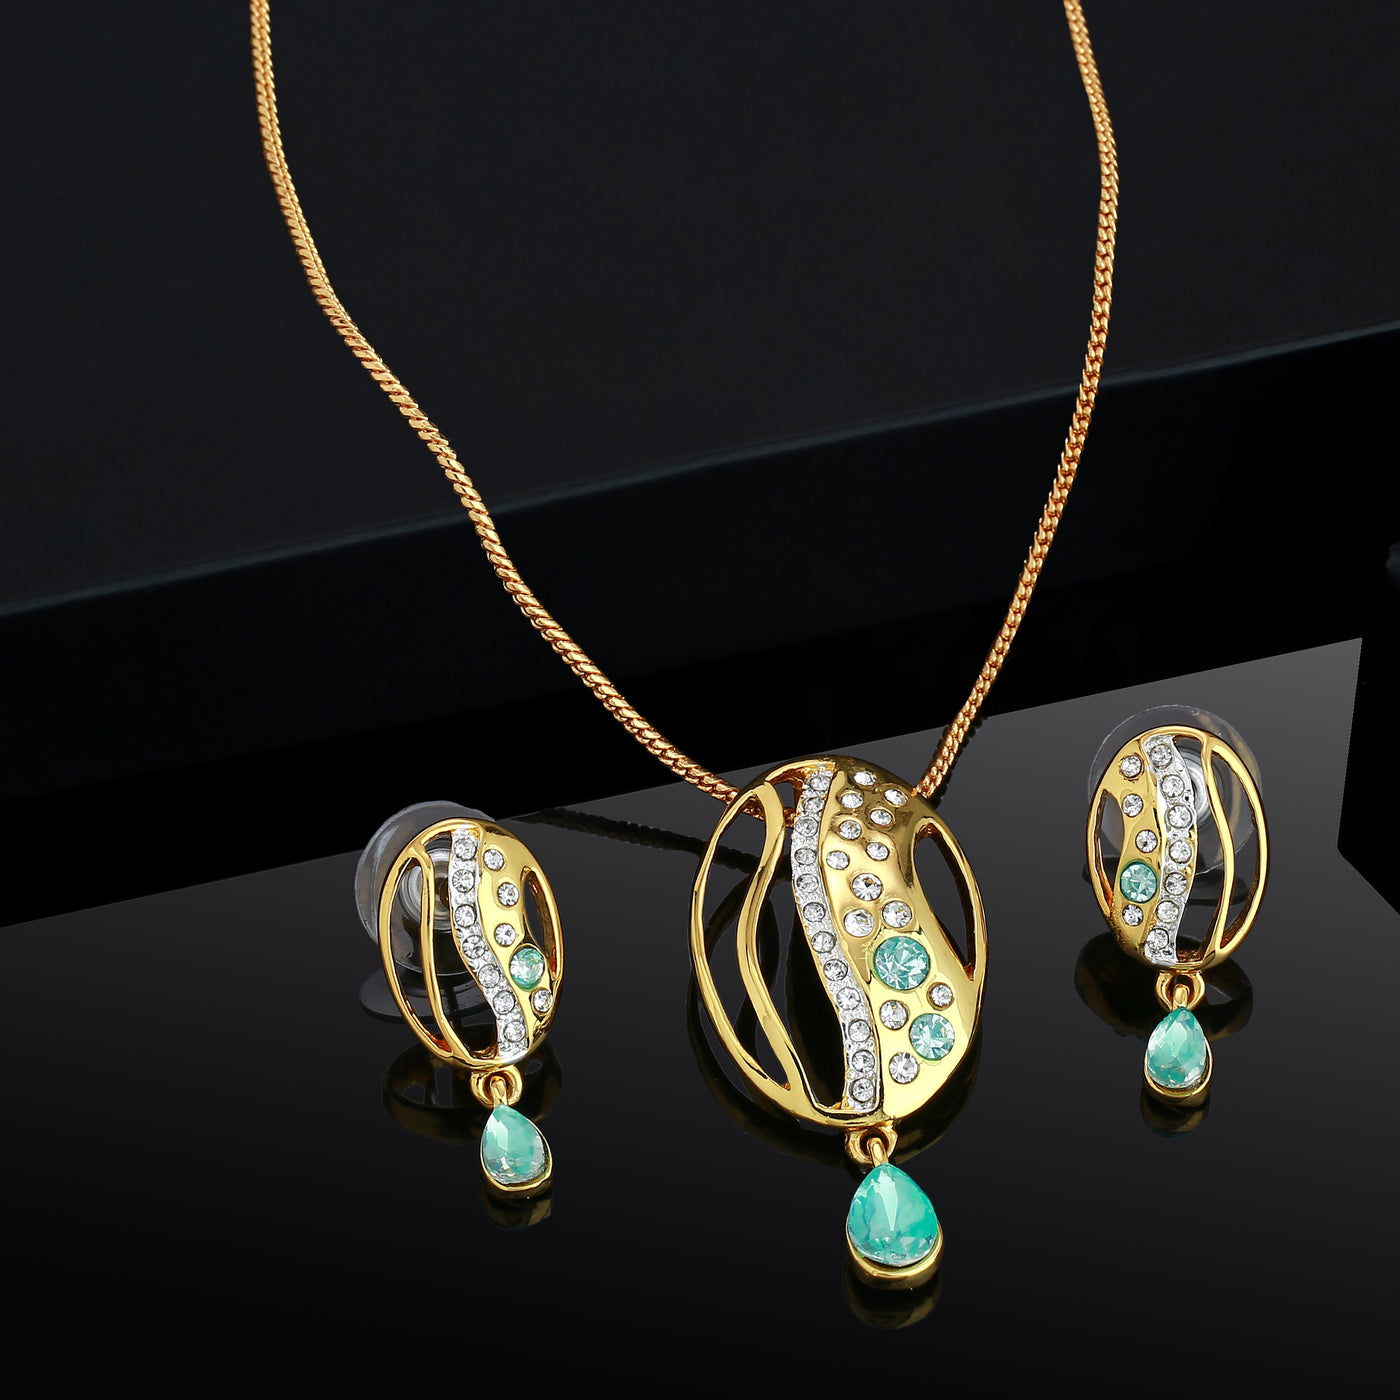 Estele - Gold Plated fancy pendant set with Austrian crystals and Mint Stones